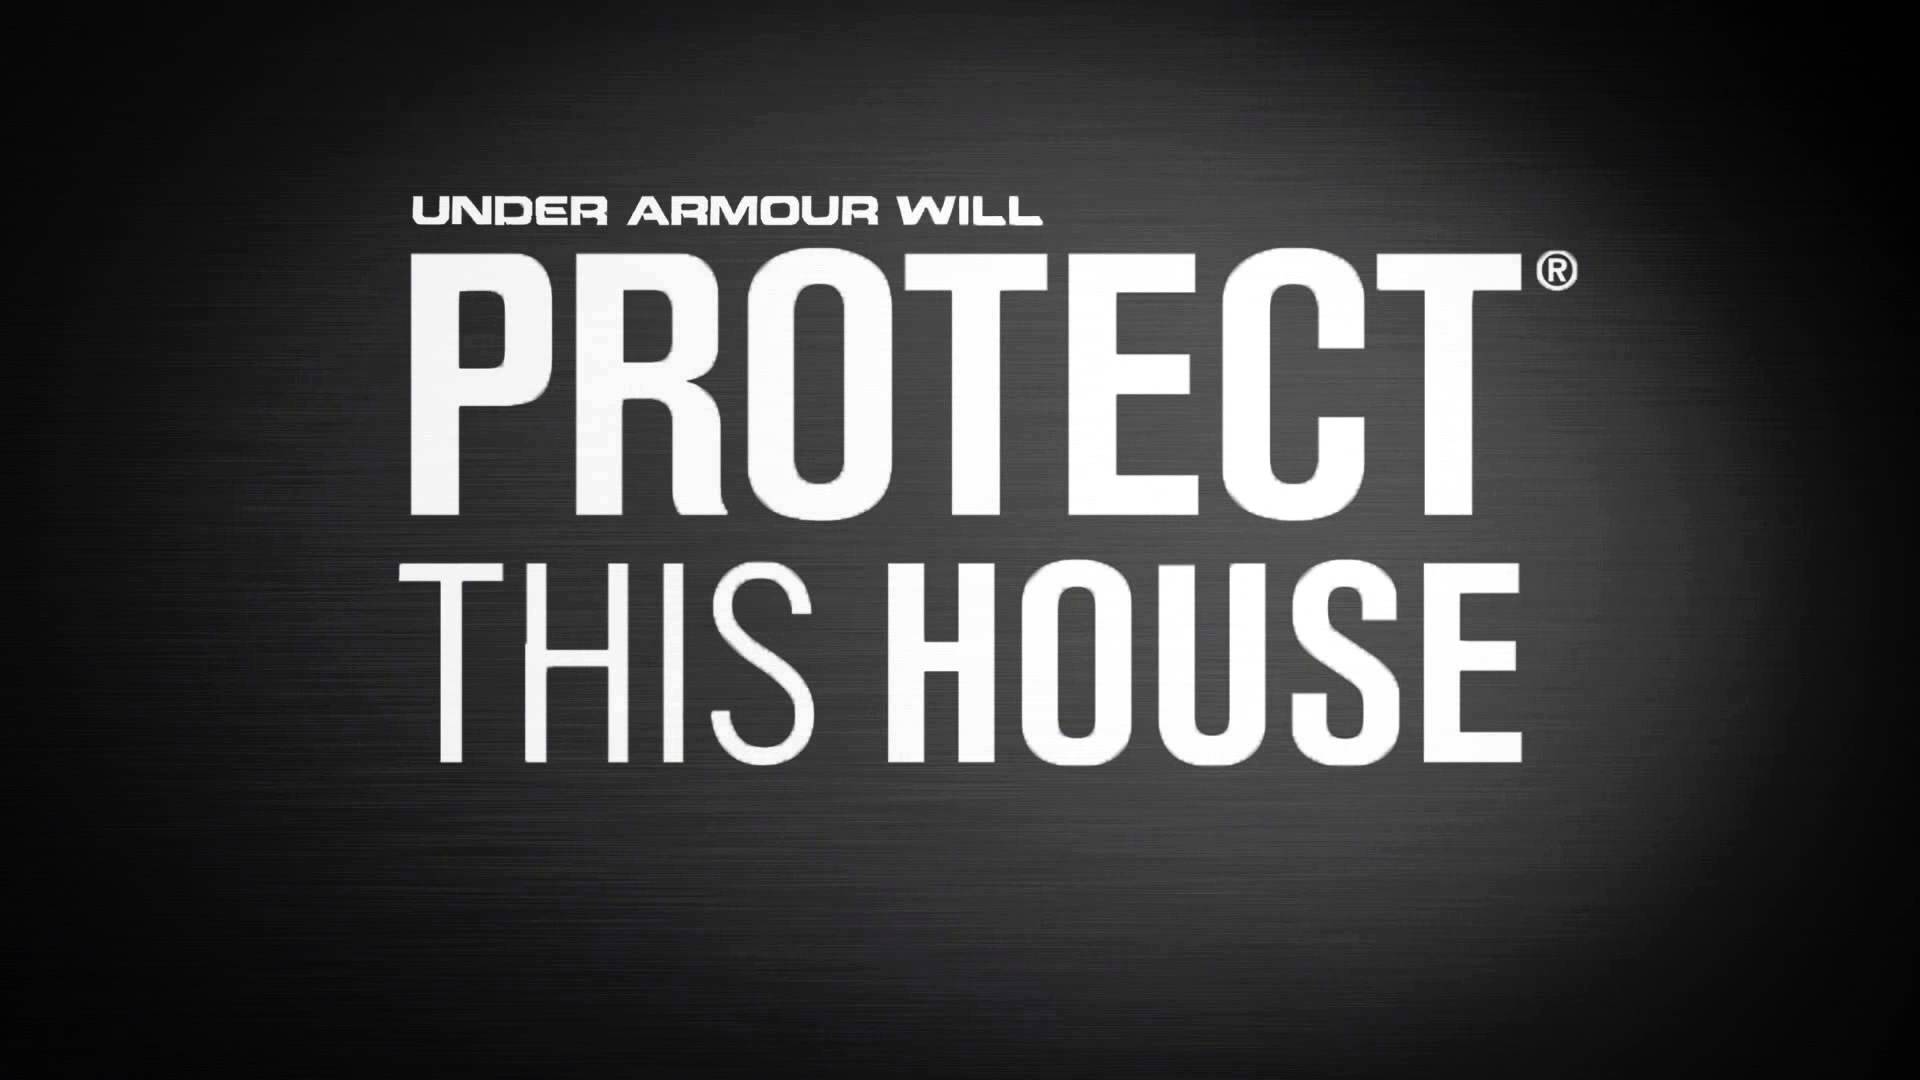 under armor protect this house